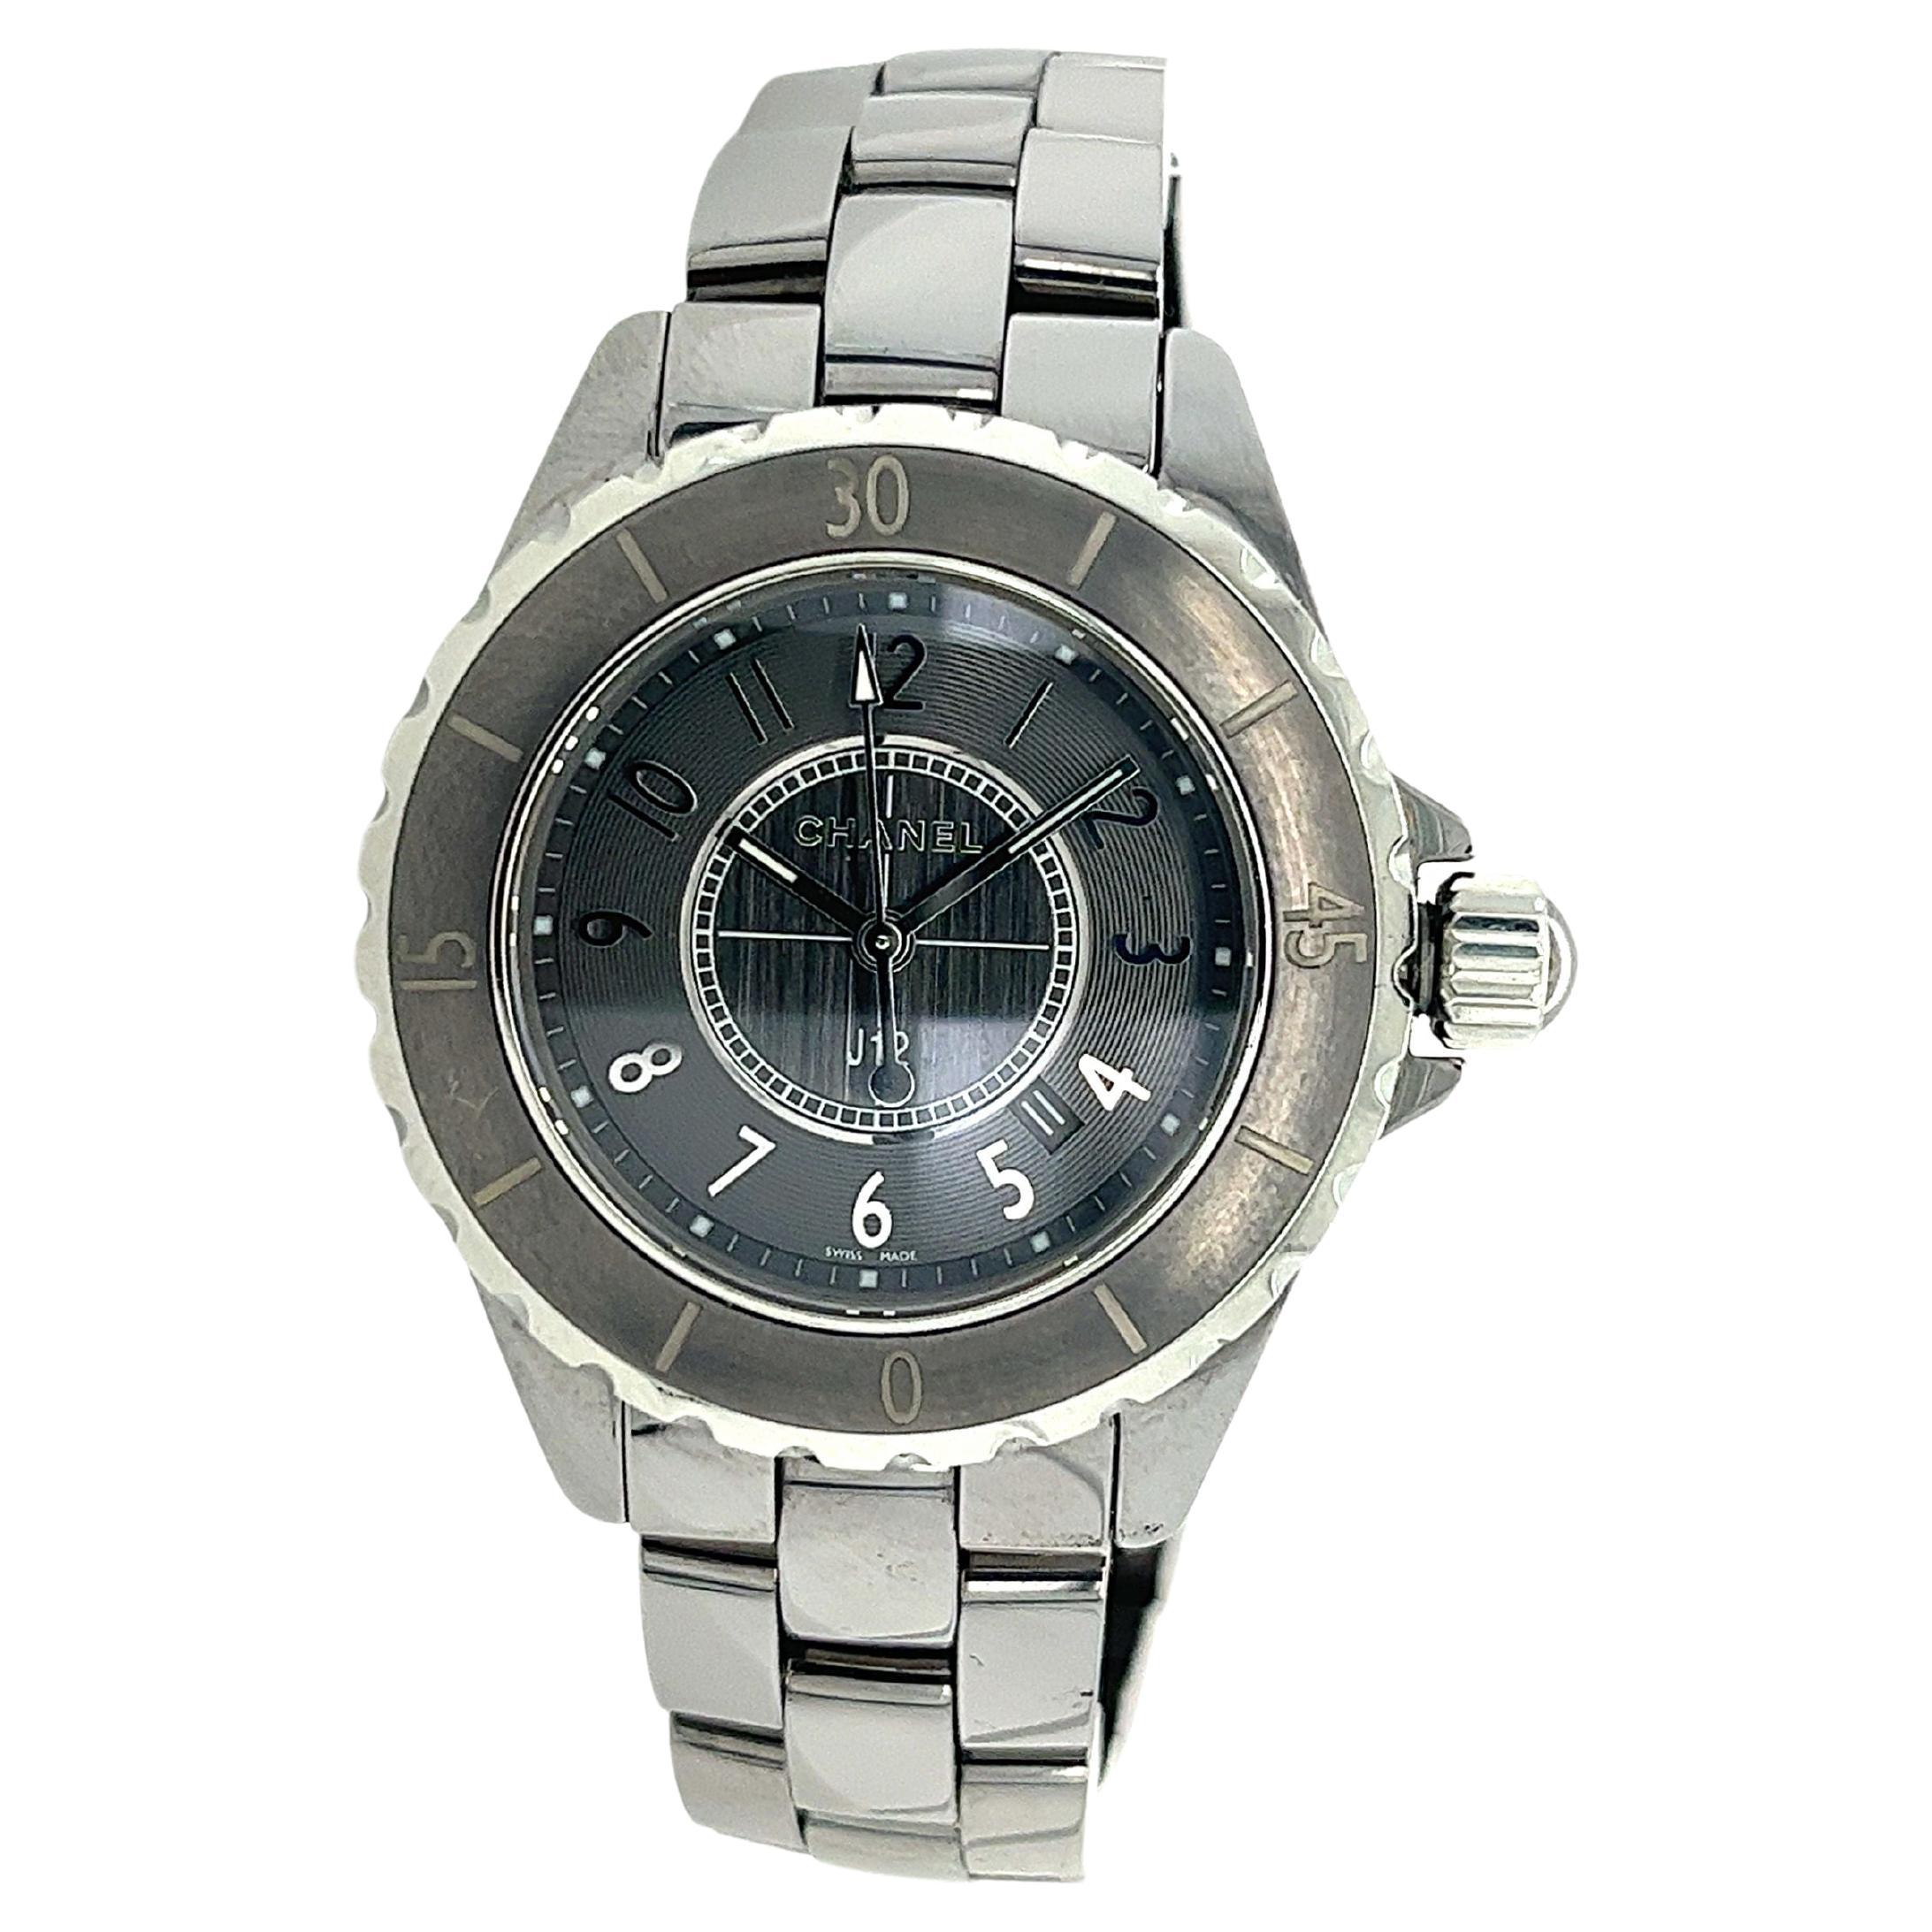 Chanel J12 Quartz Black Ceramic And Stainless Steel 33mm Watch For Sale